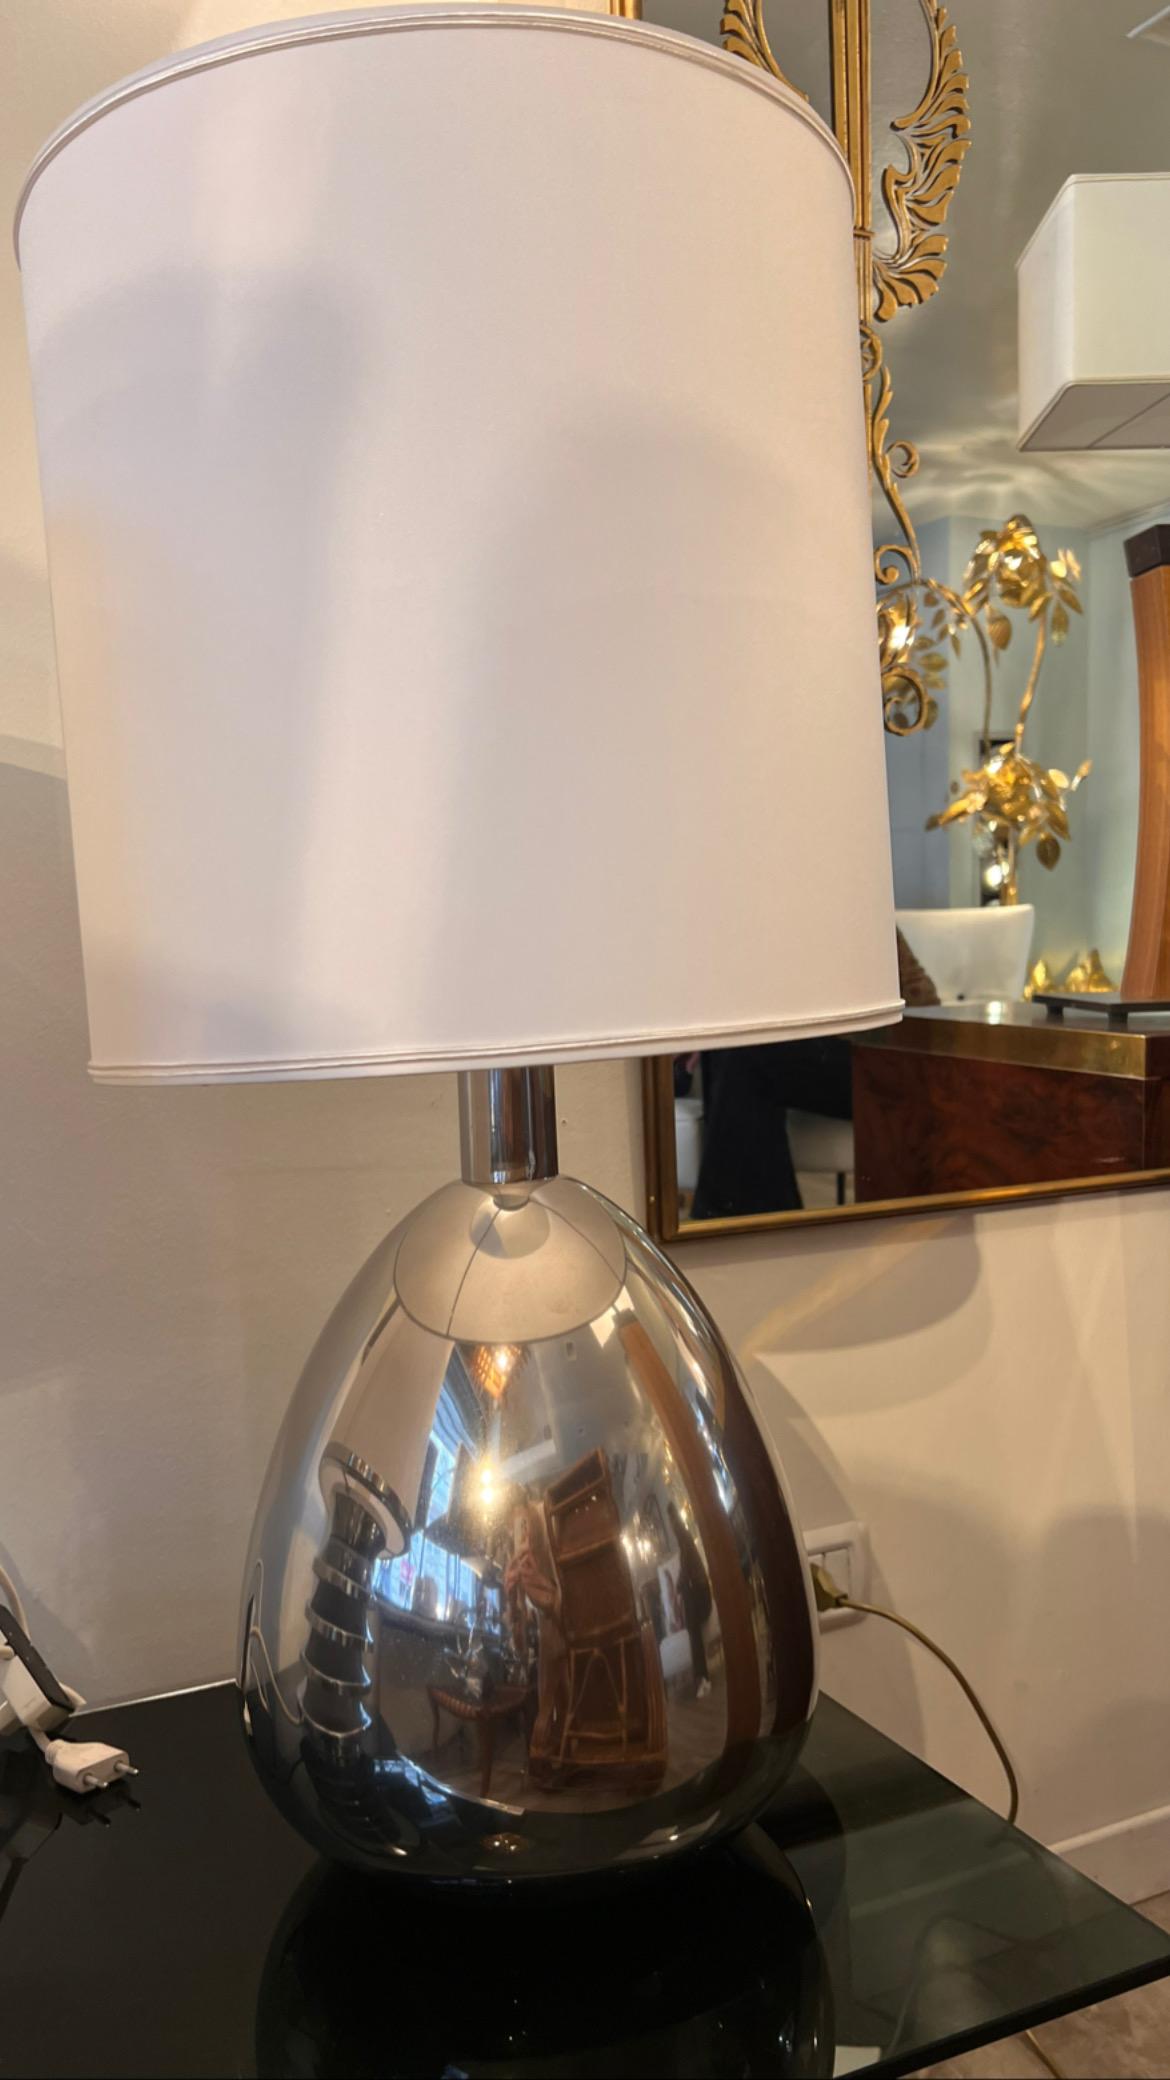 1970s Chromed Steel Table Lamp with white lampshade. 
This lamp is egg-shaped and it features original wiring working system.
Size of the lamp: